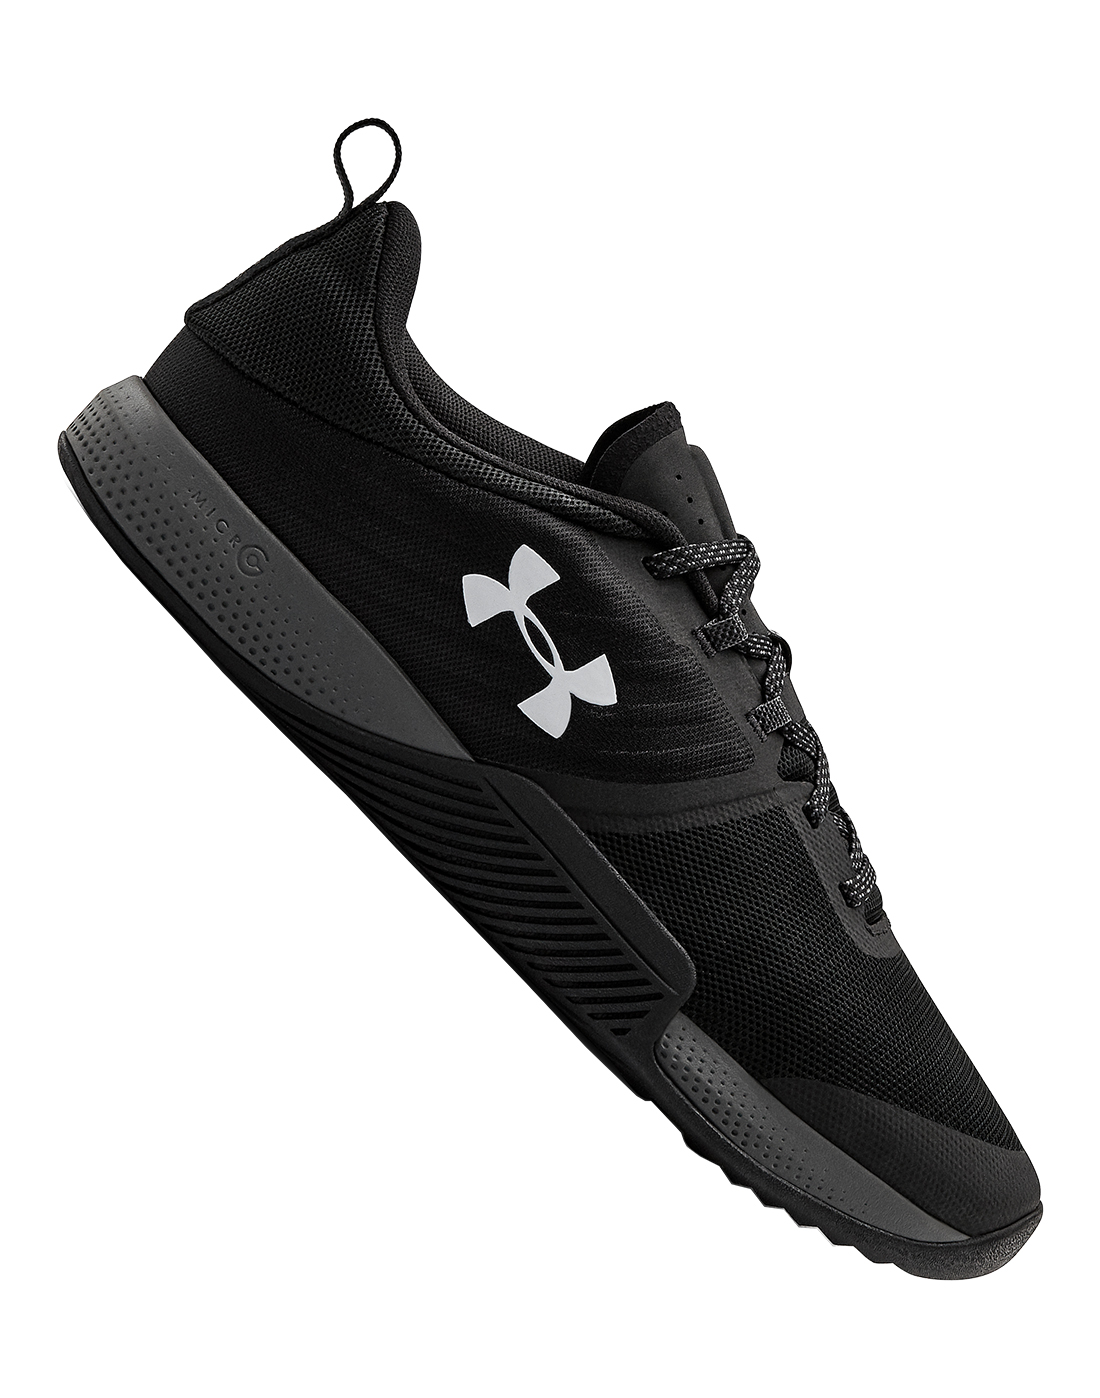 Under Armour Mens TriBase Thrive Training Gym Fitness Shoes Black Sports 